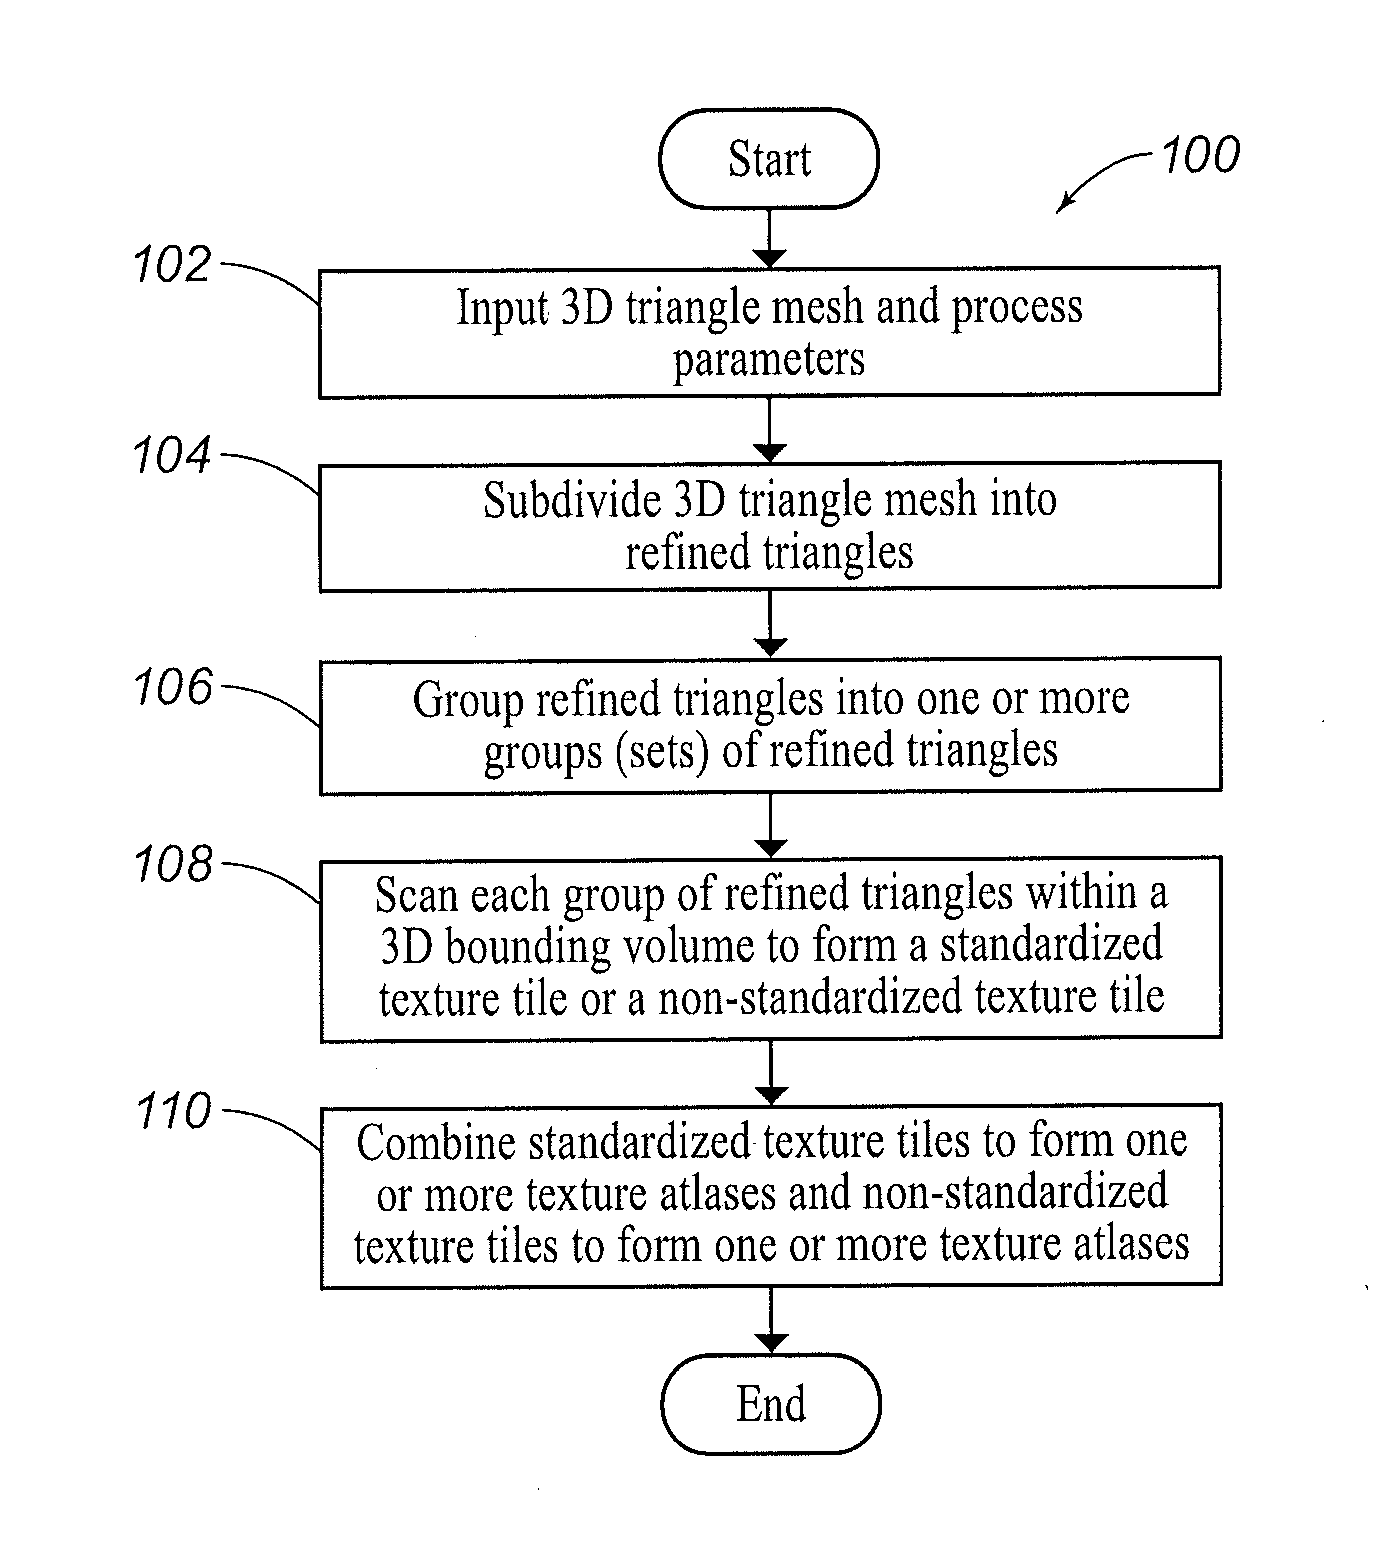 Systems and Methods for Creating a Three-Dimensional Texture Atlas